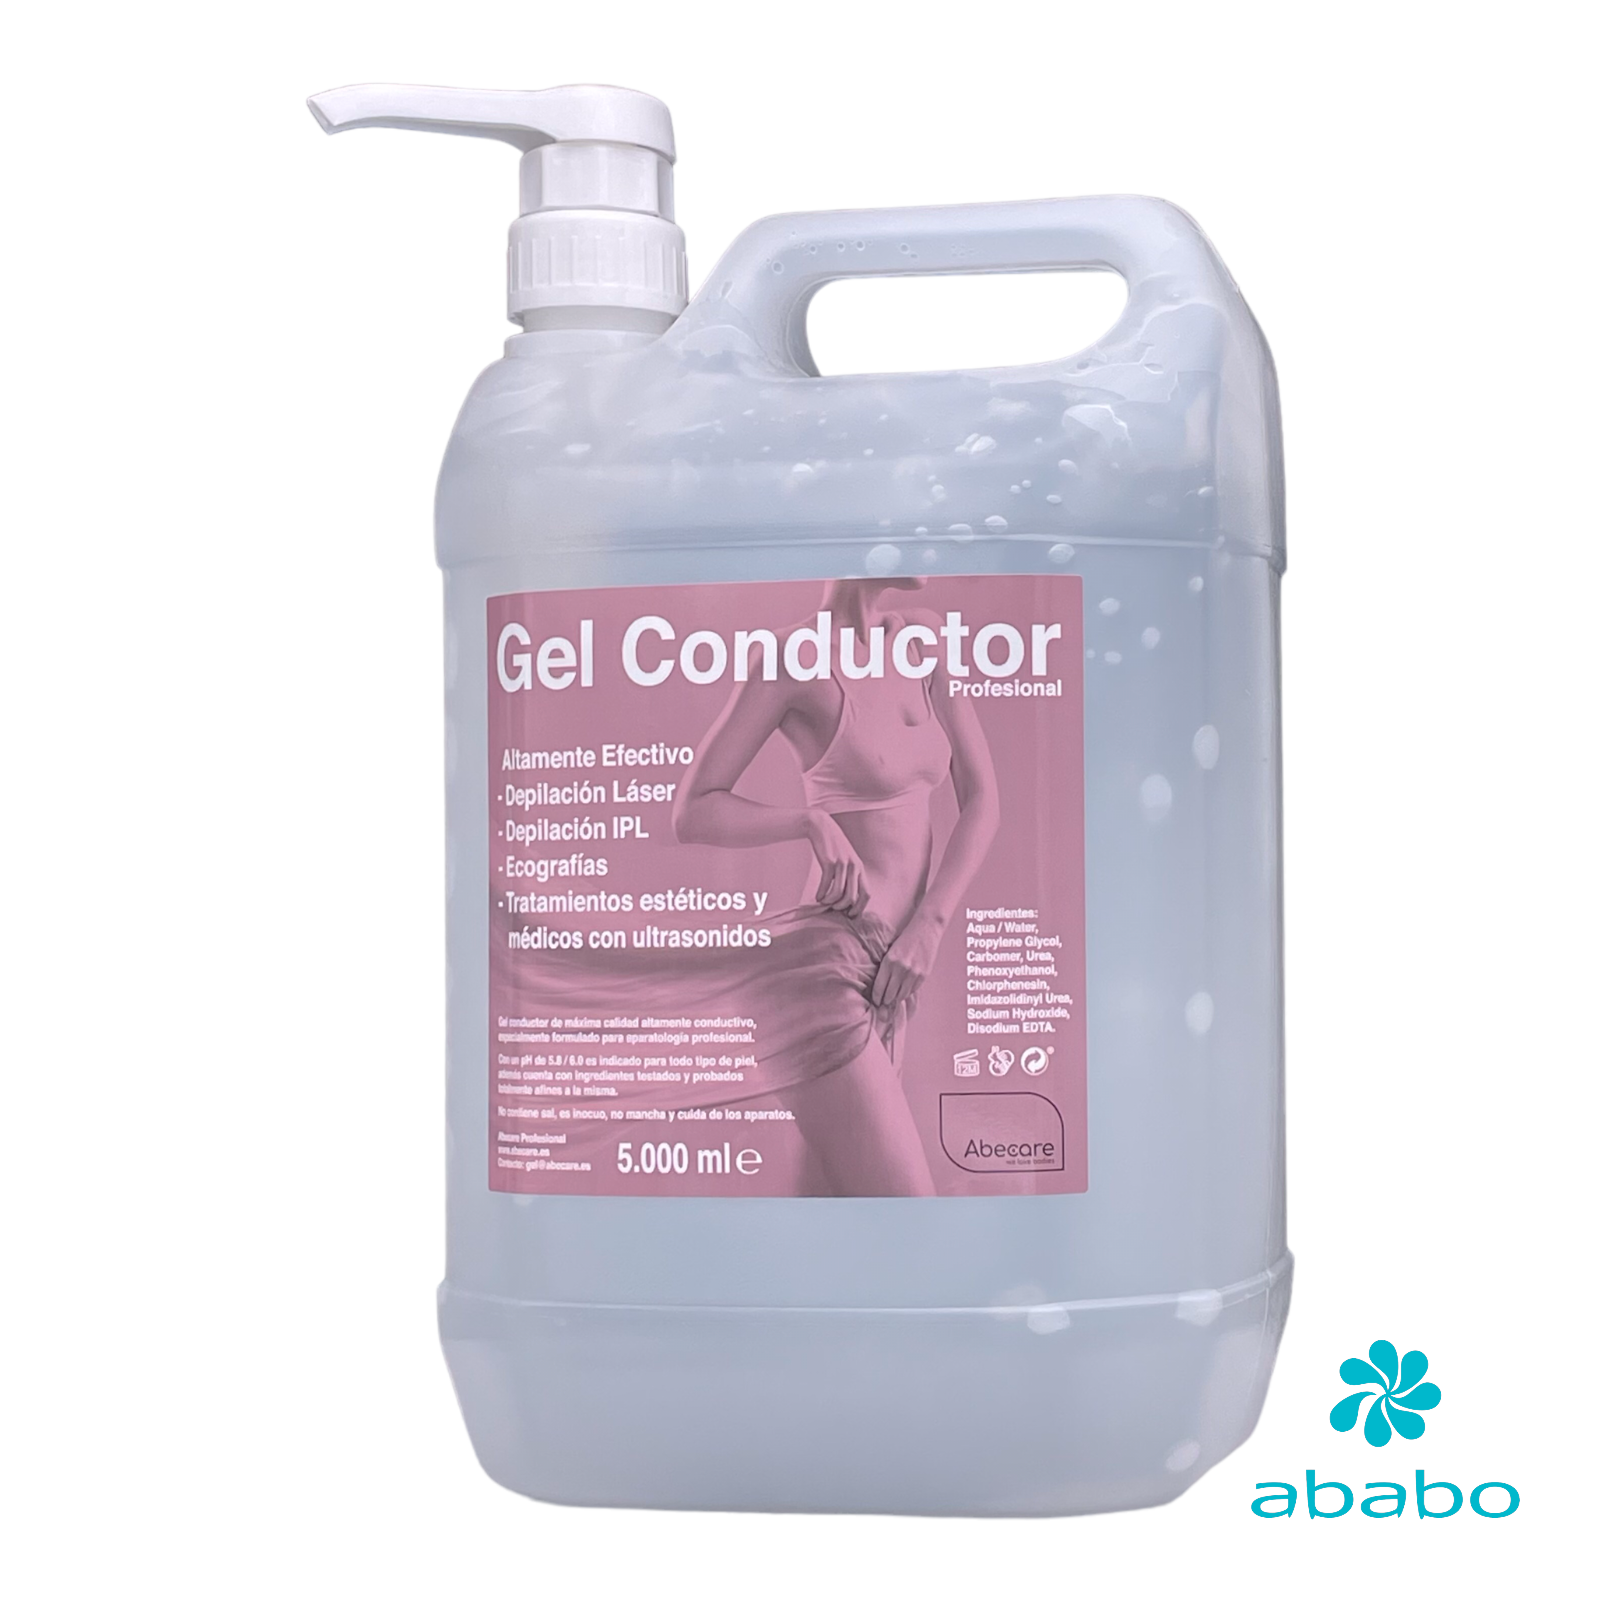 Gel Conductor Incoloro 3 x 5.000ml - ABABO